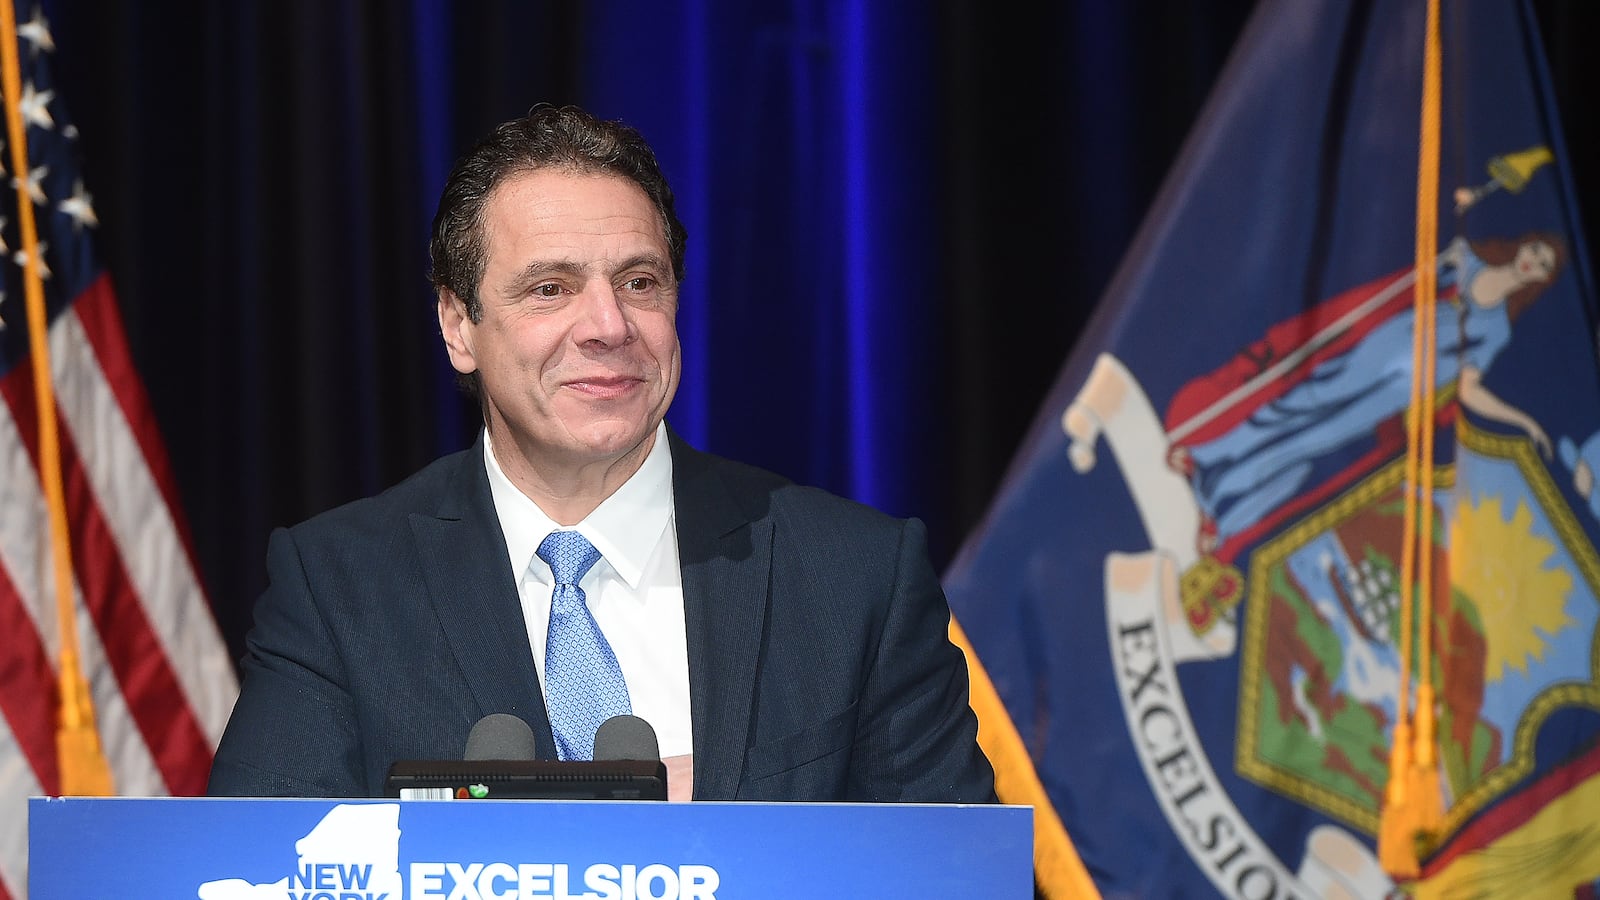 Governor Andrew Cuomo delivers his State of the State address in 2017.